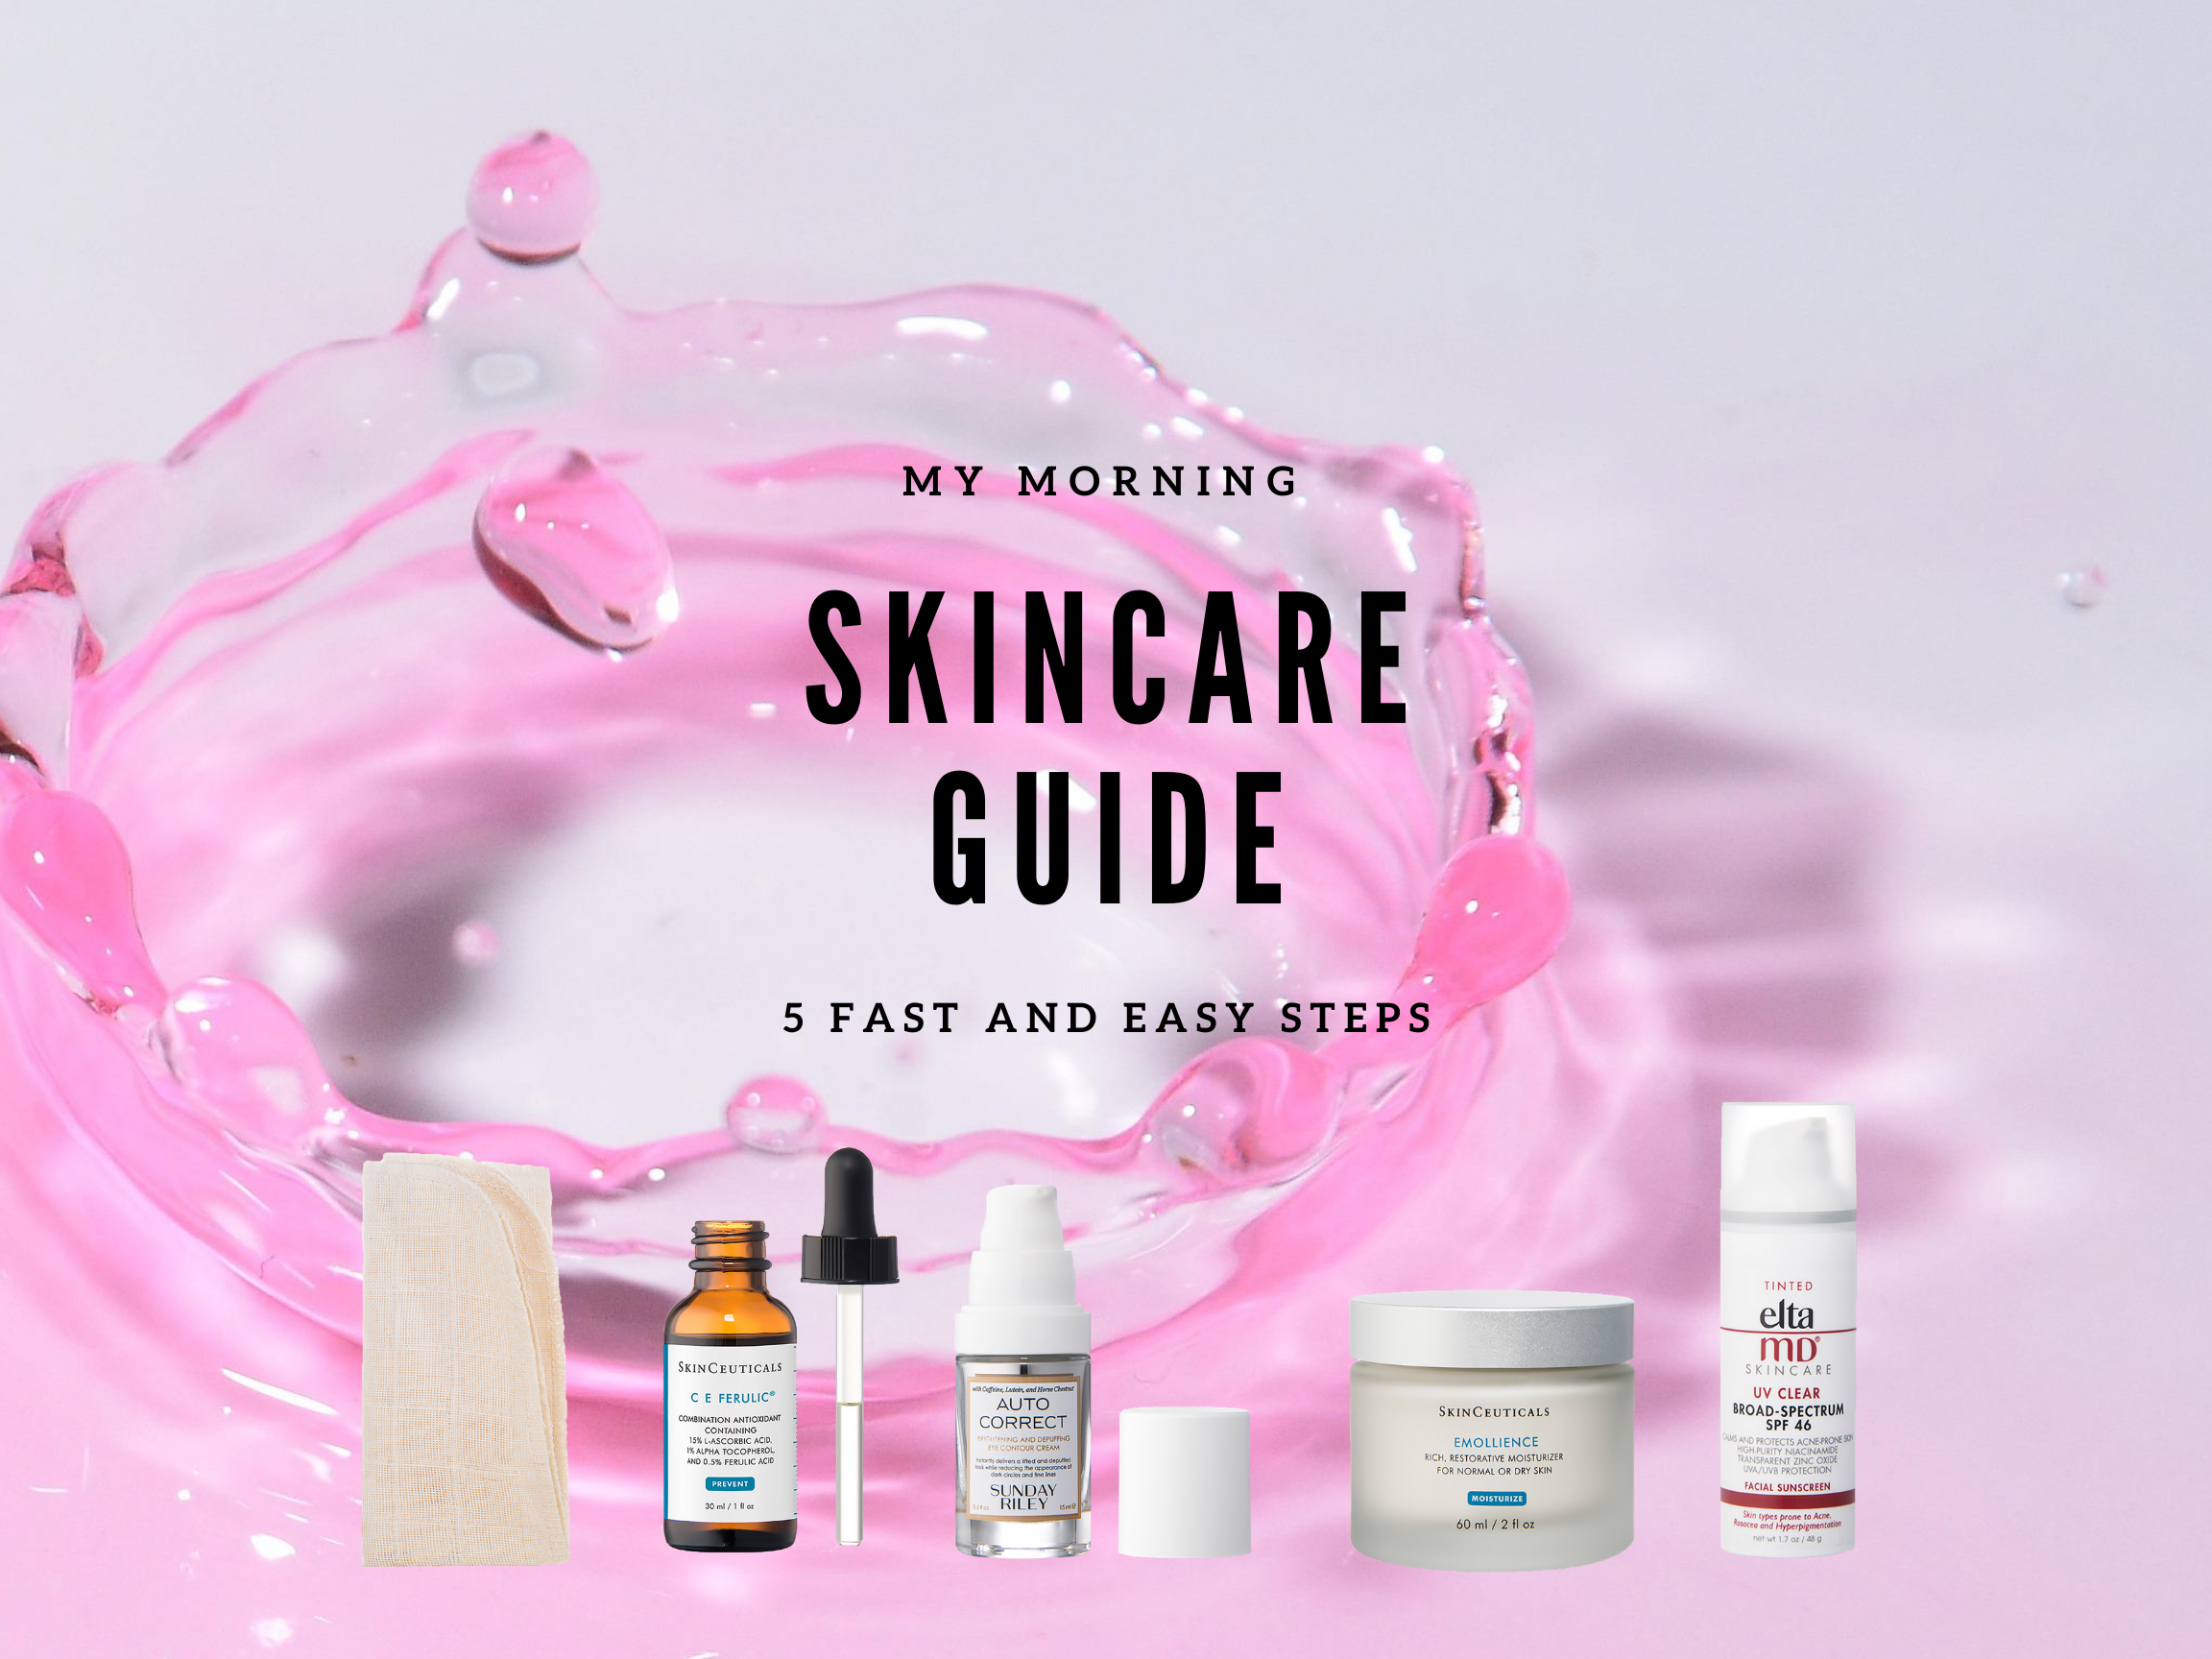 My Morning Skincare Guide: 5 Fast and Easy Steps